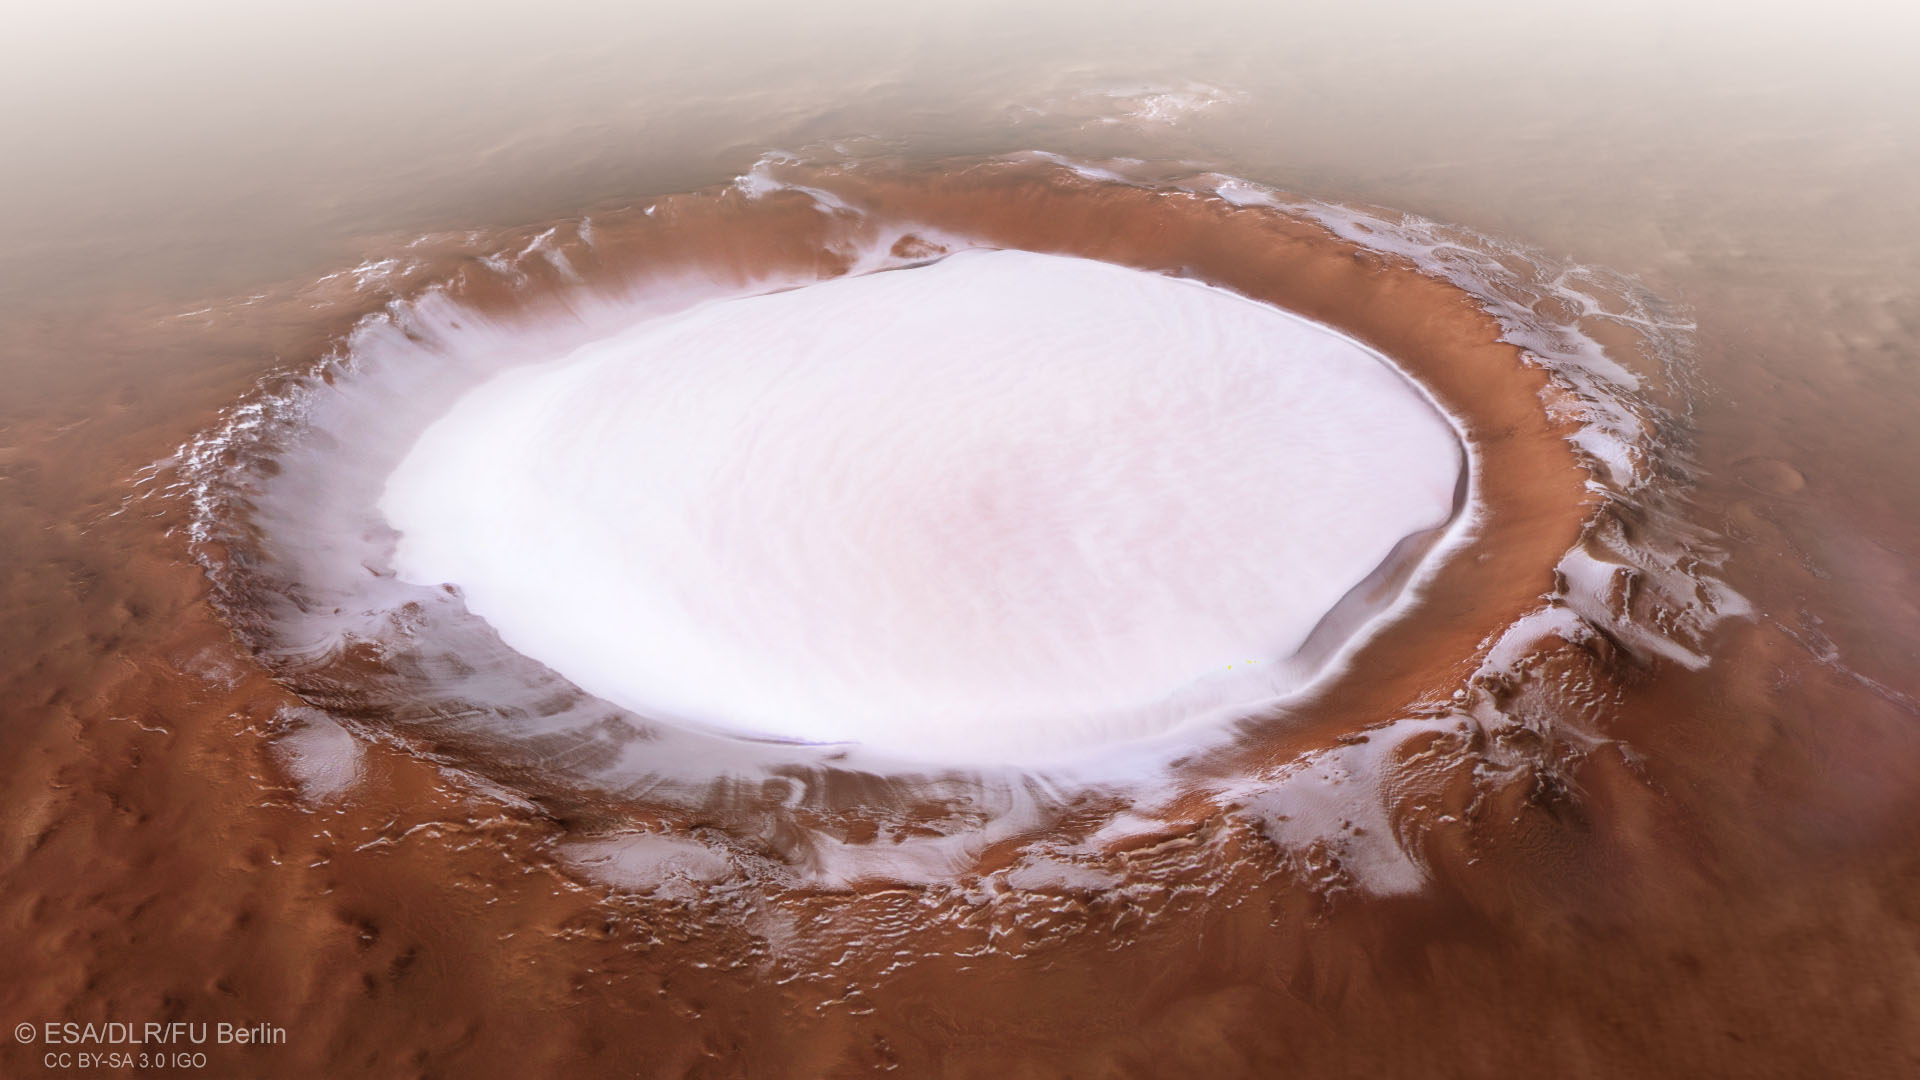 Perspective_view_of_Korolev_crater.jpg.a9ed1217c40e64cf9b106aa5d7169015.jpg